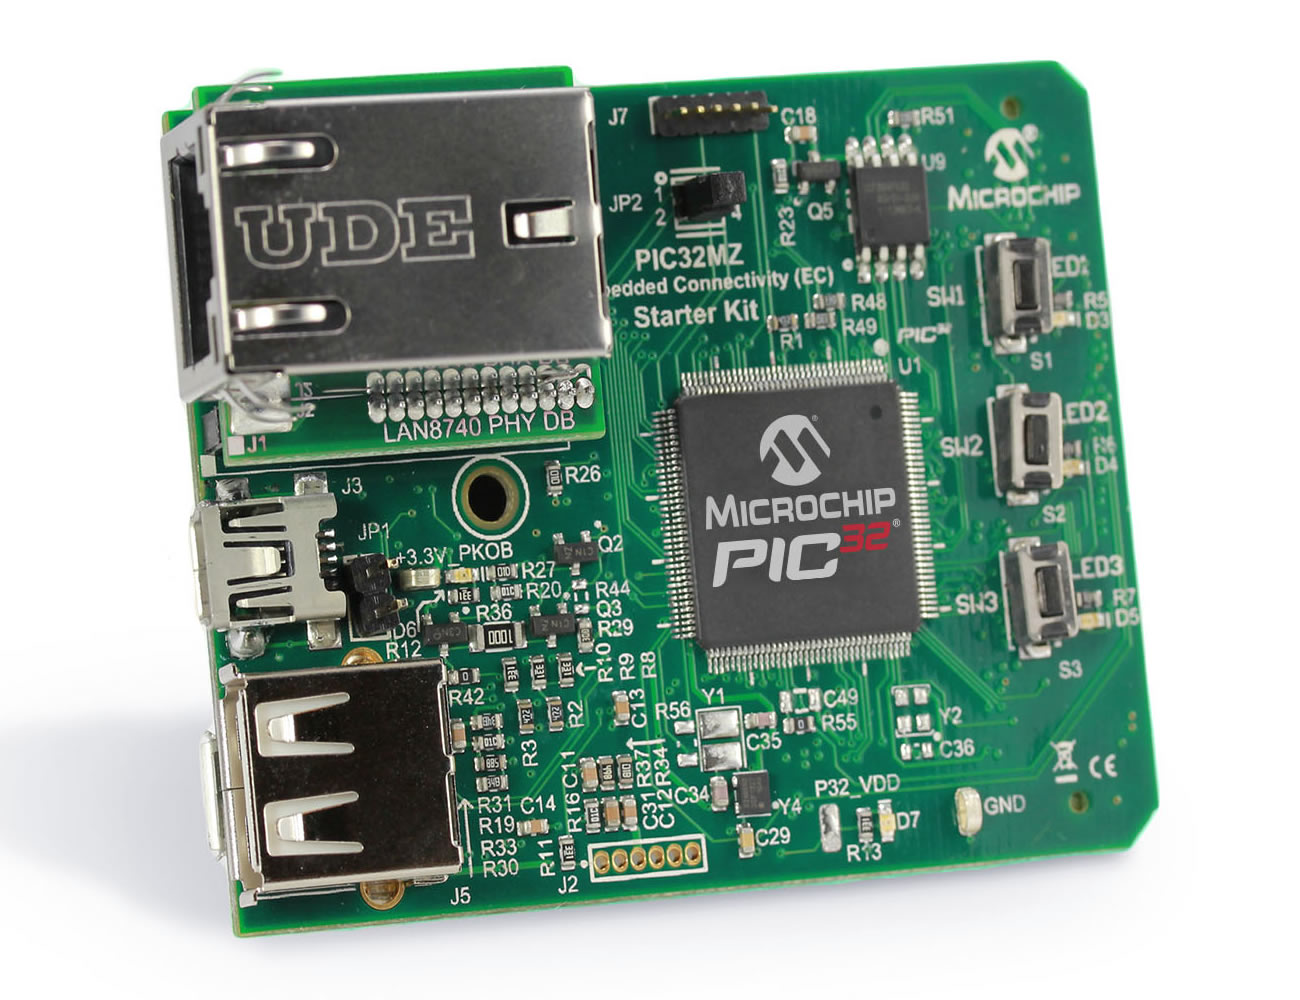 Microchip: The PIC32MZ Embedded Connectivity Starter Kit